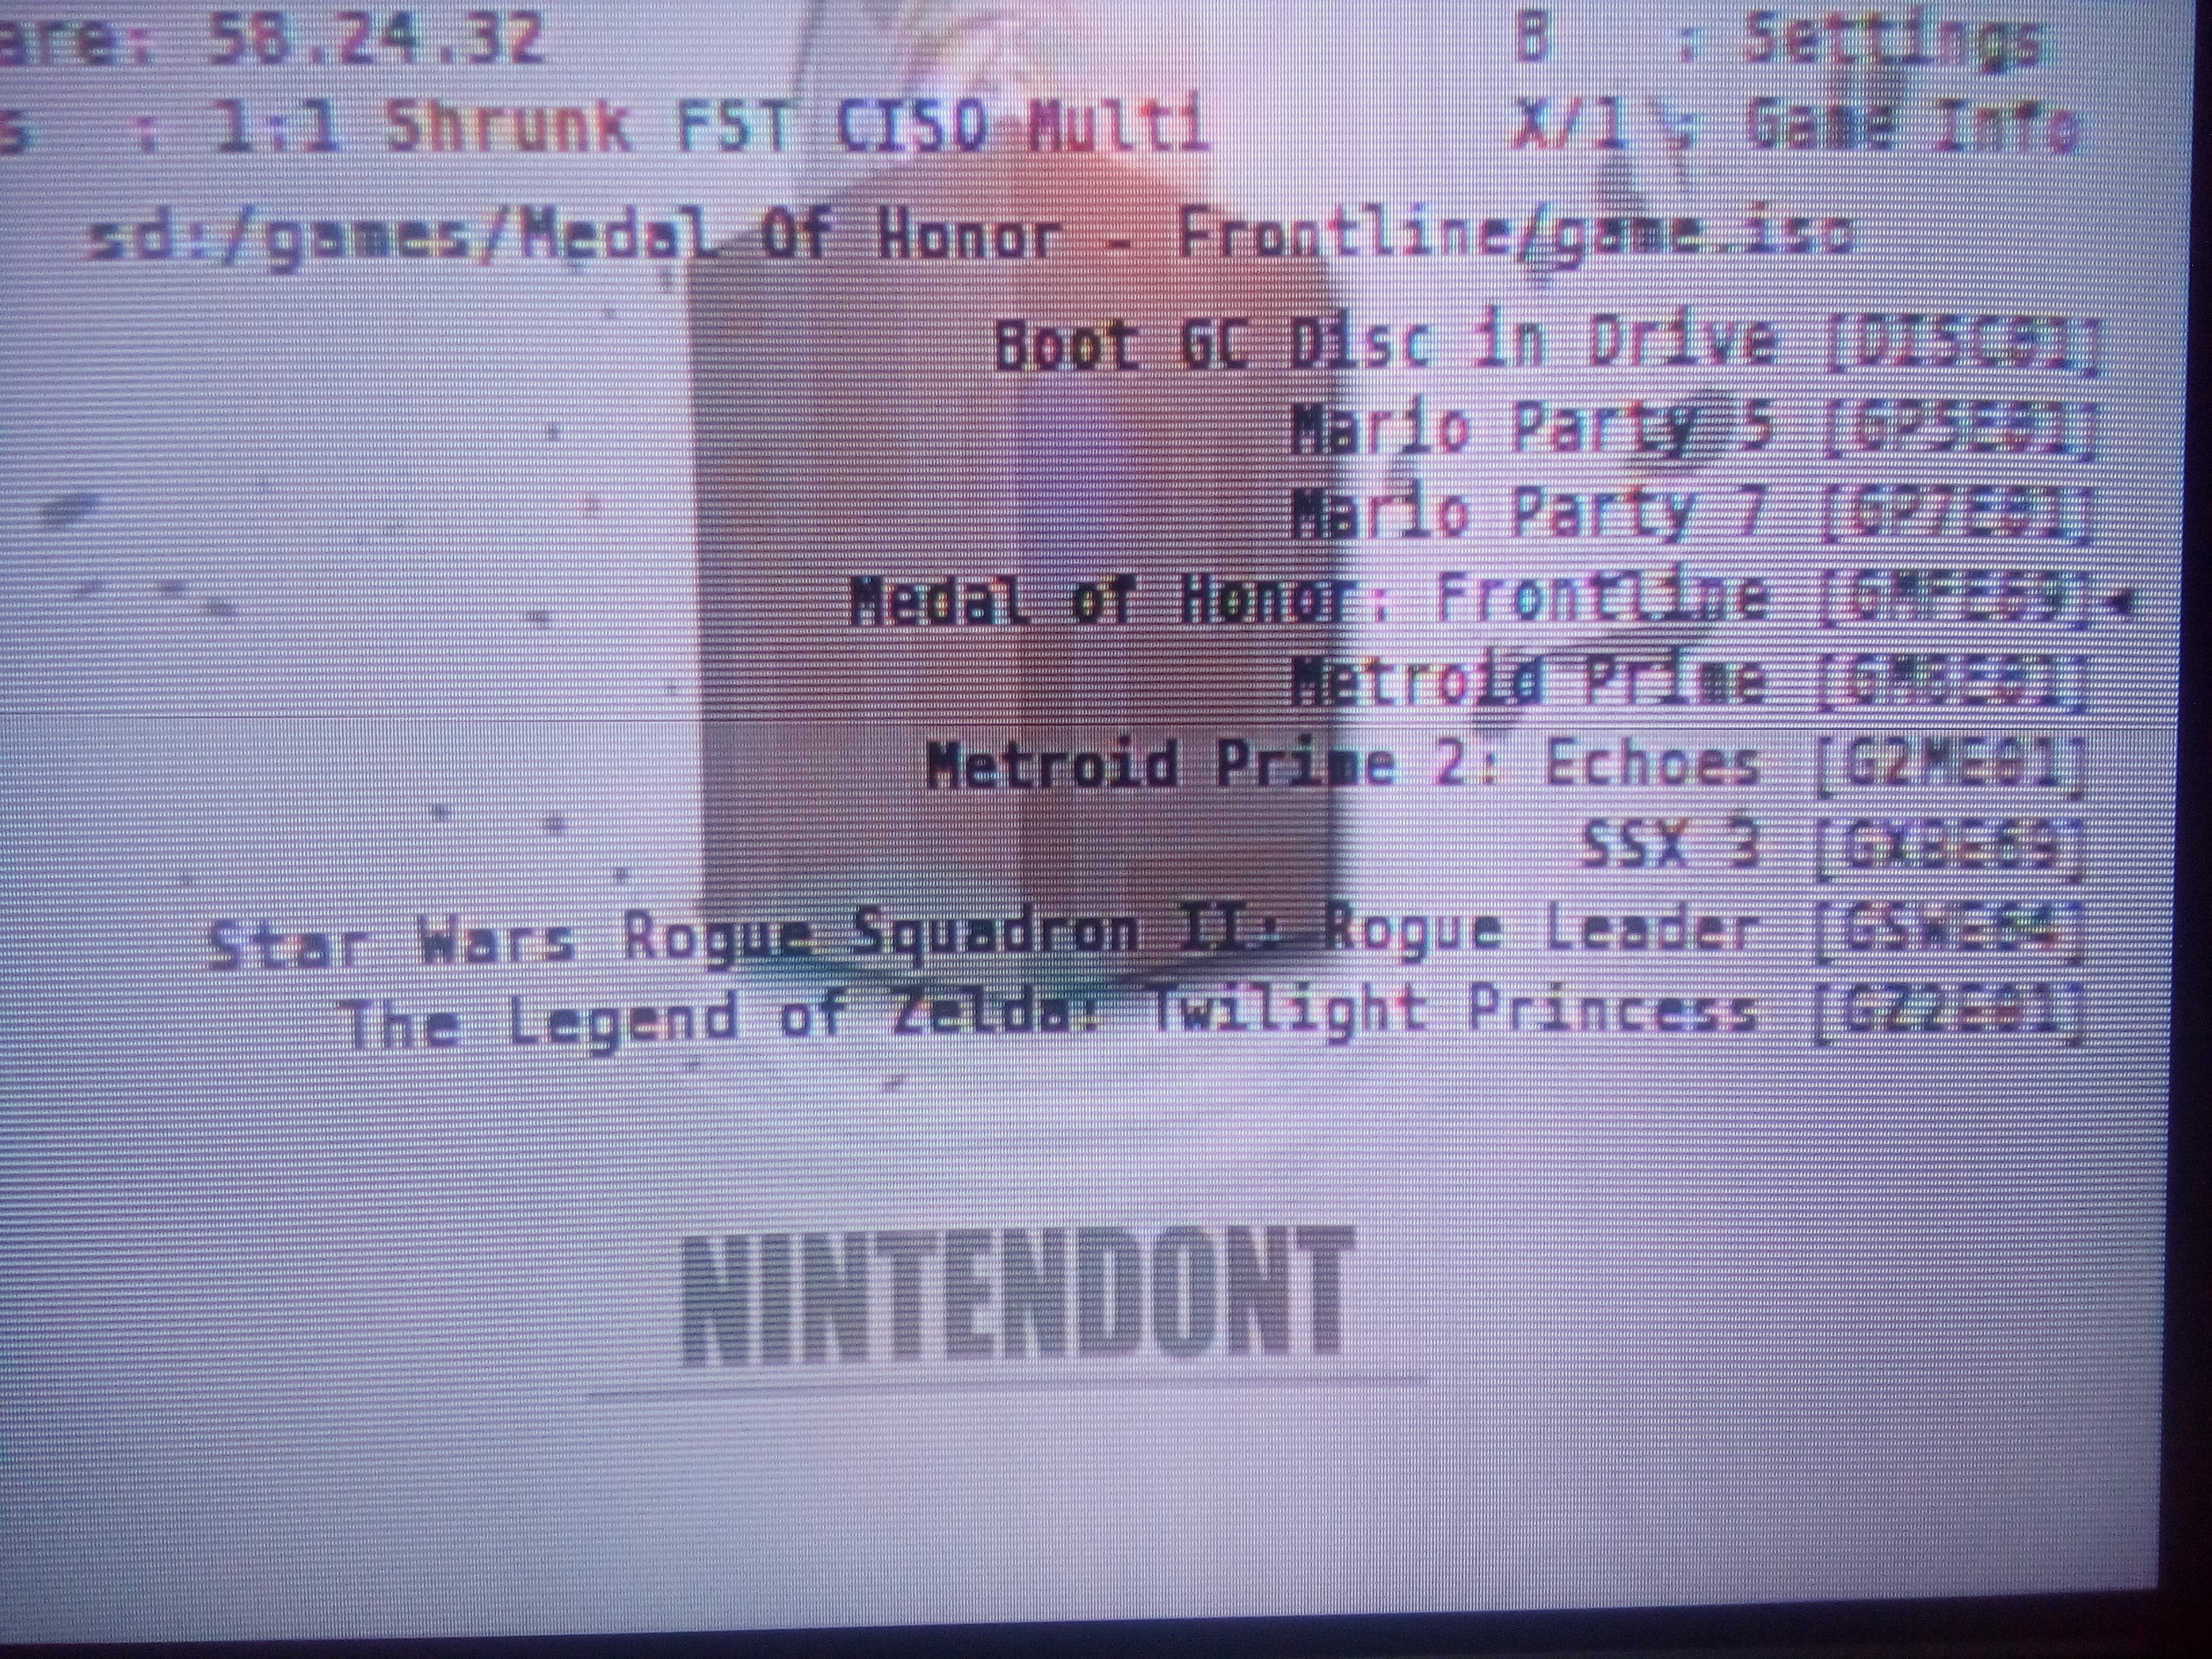 Need help with Nintendont.   - The Independent Video